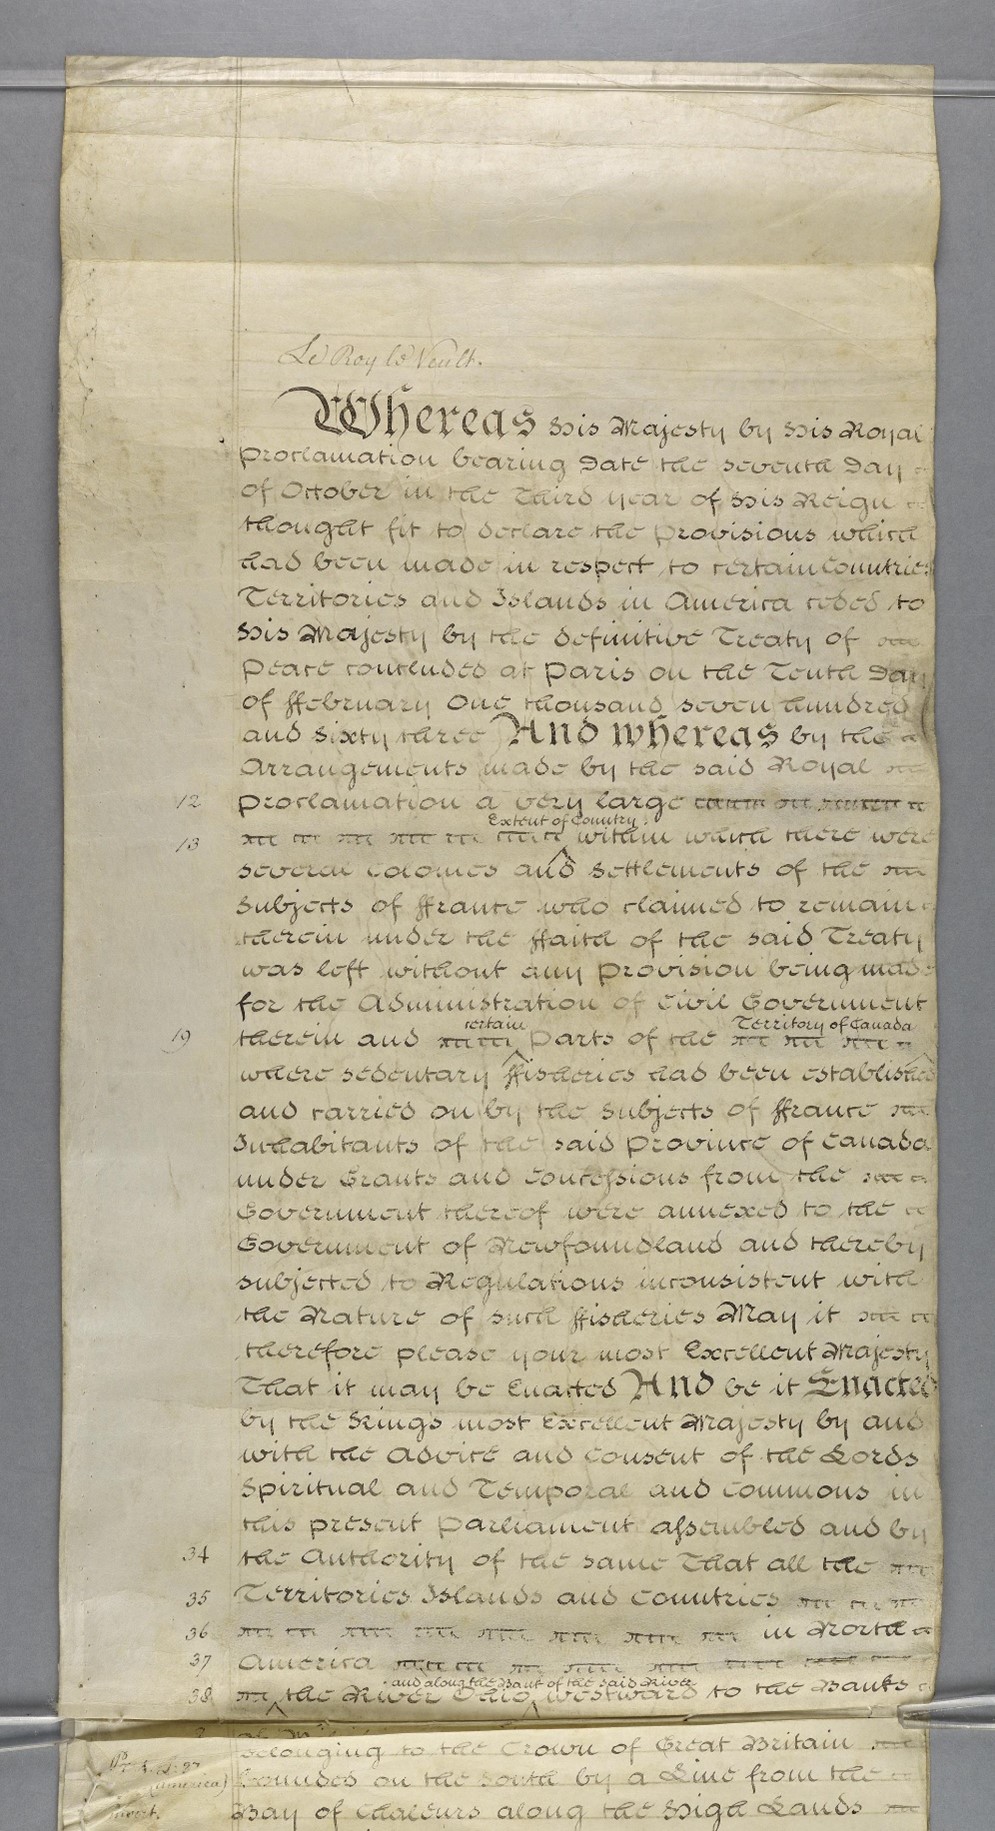 An Act for making more effectual Provision for the Government of the Province of Quebec in North America (1774) (Parliamentary Archives, HL/PO/PU/1/1774/14G3n226) (https://www.parliament.uk/about/living-heritage/evolutionofparliament/legislativescrutiny/parliament-and-empire/collections1/parliament-and-canada/quebec-act-1774/)